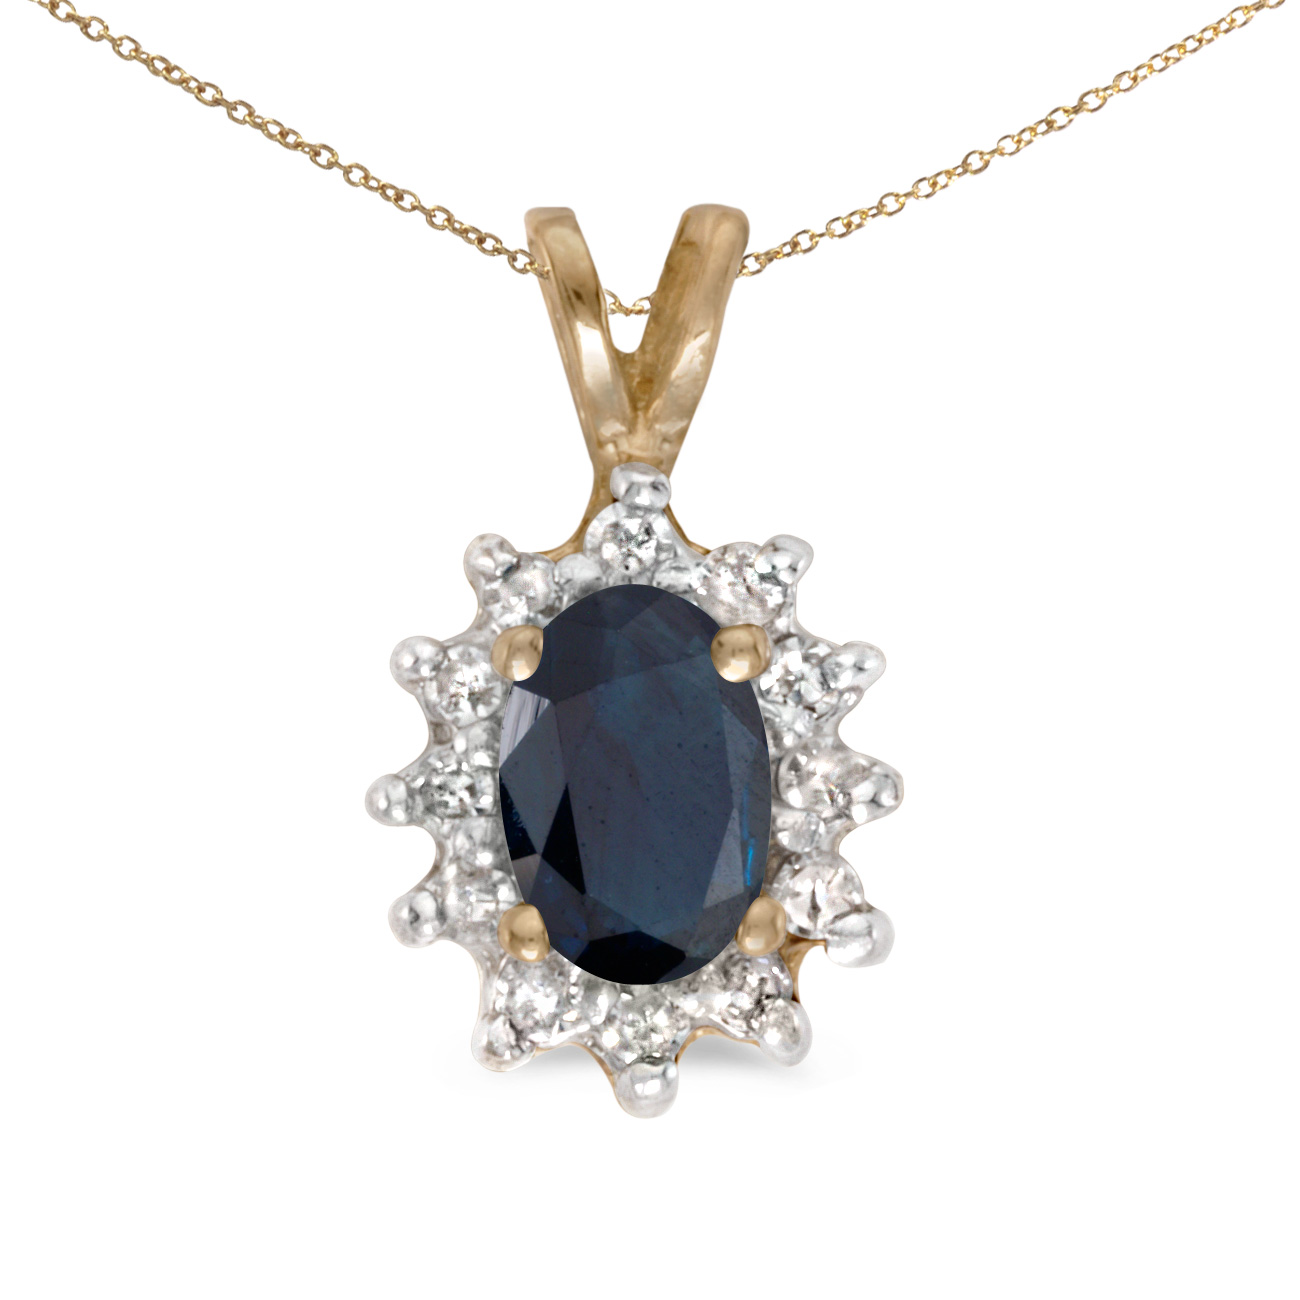 JCX2736: This 14k yellow gold oval sapphire and diamond pendant features a 6x4 mm genuine natural sapphire with a 0.39 ct total weight.